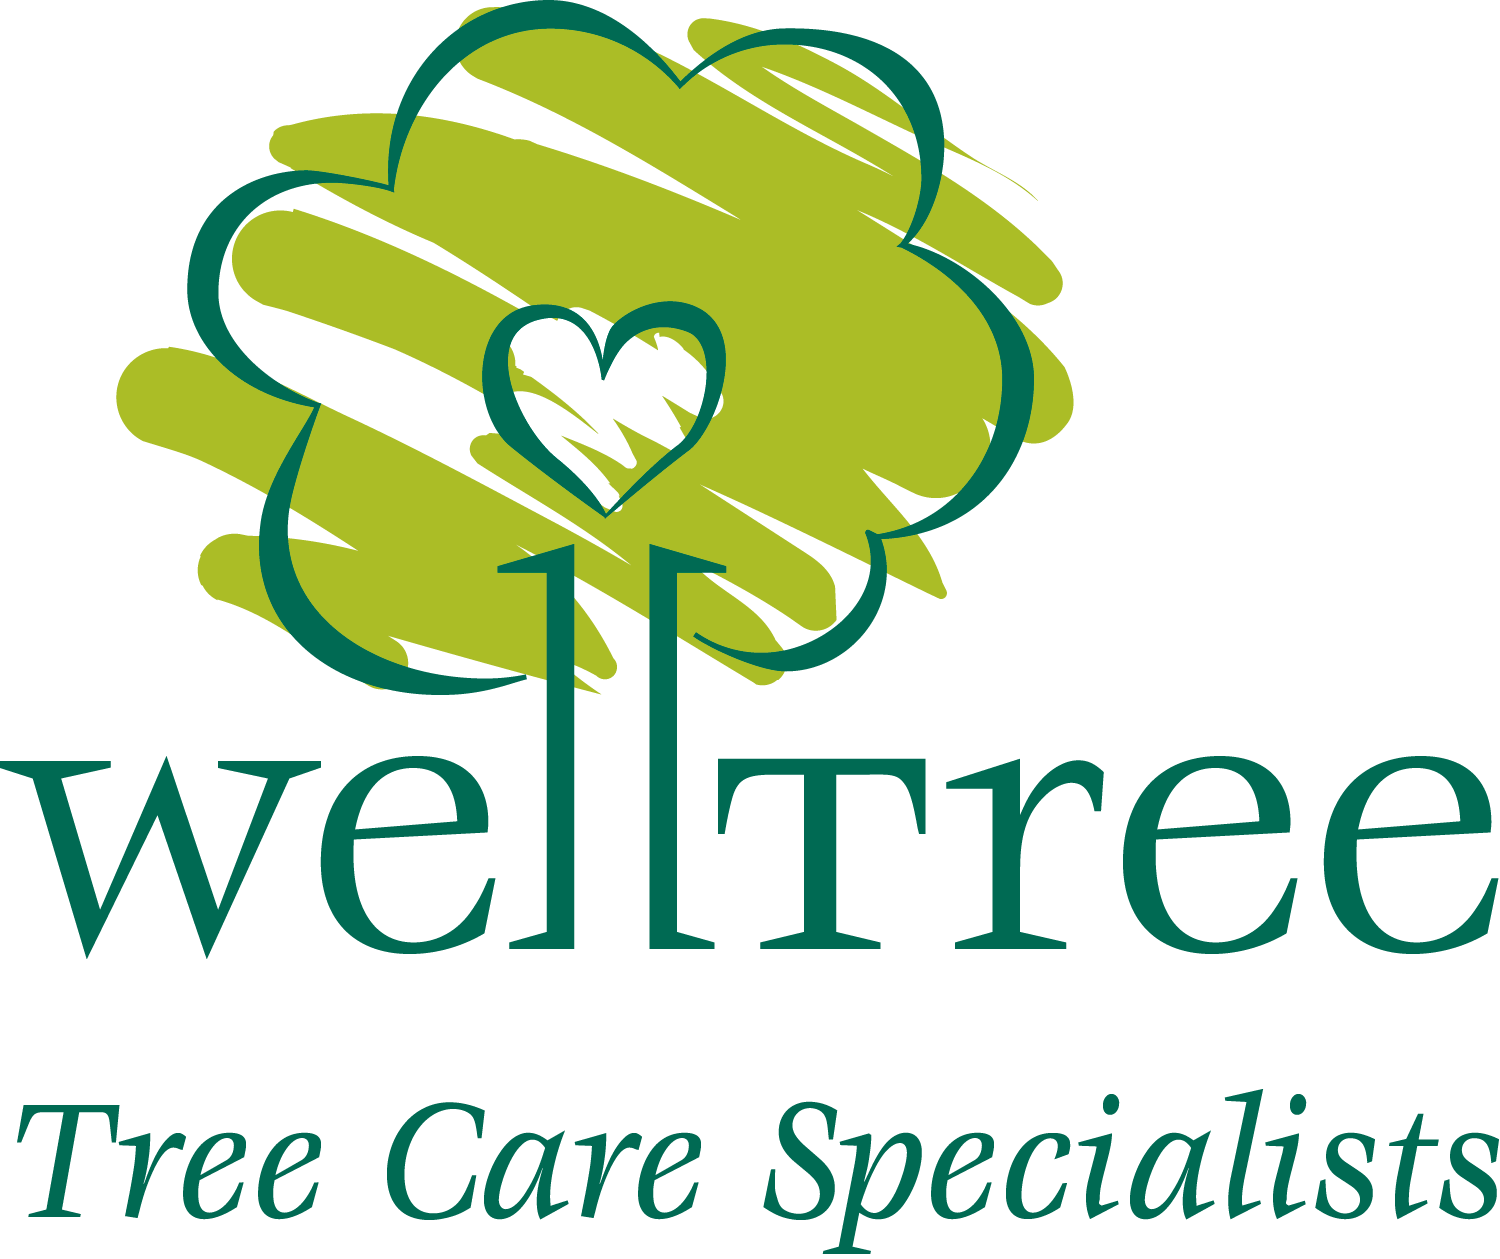 The WellTree logo and tagline lock-up